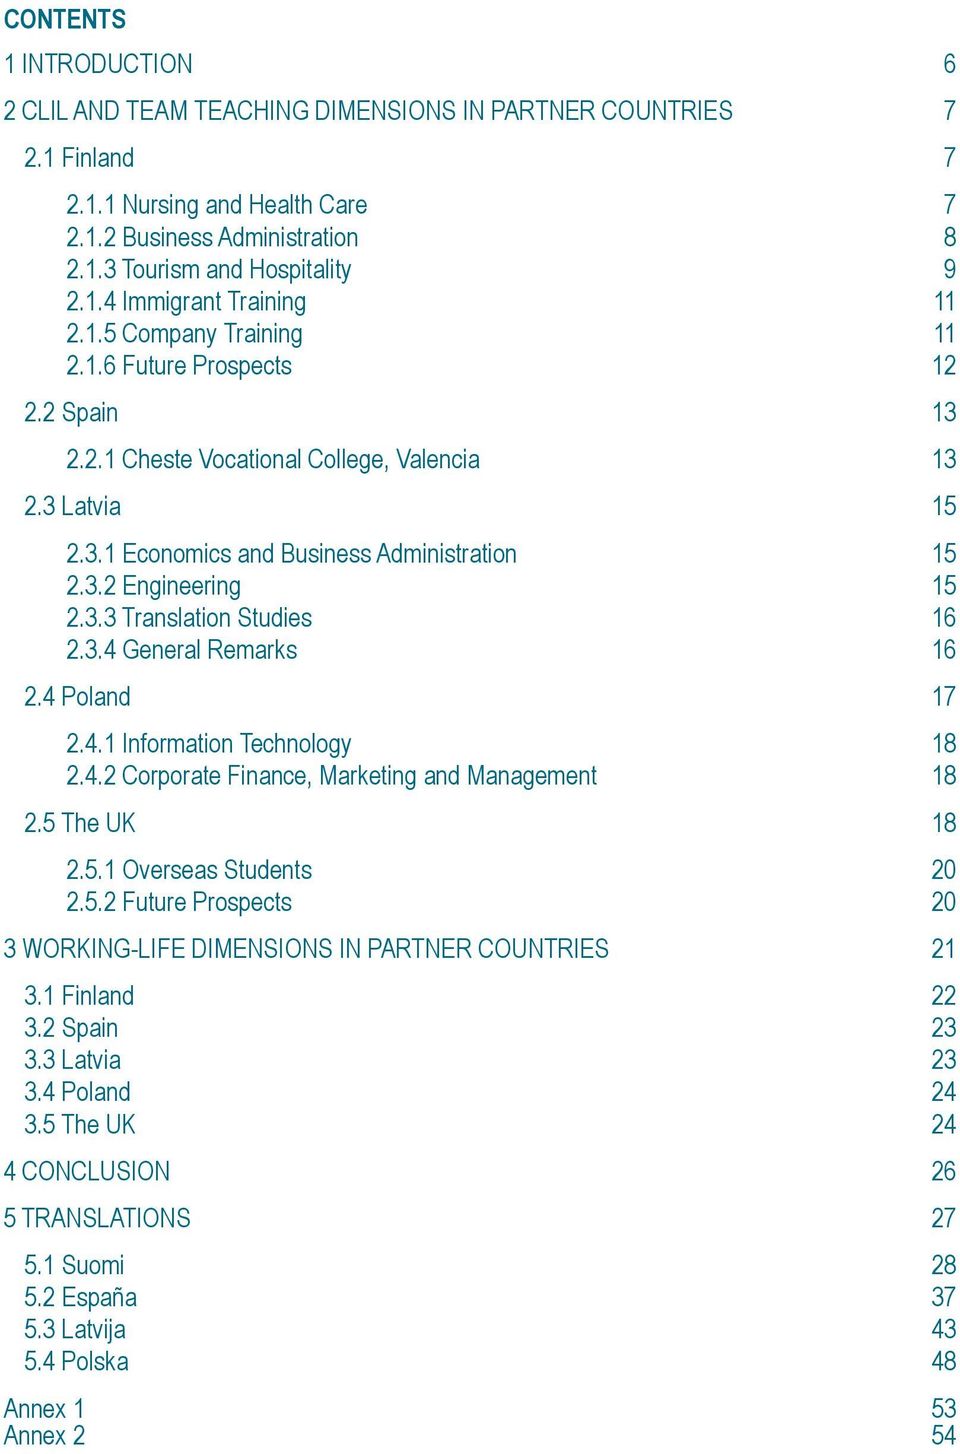 3.4 General Remarks 16 2.4 Poland 17 2.4.1 Information Technology 18 2.4.2 Corporate Finance, Marketing and Management 18 2.5 The UK 18 2.5.1 Overseas Students 20 2.5.2 Future Prospects 20 3 WORKING-LIFE DIMENSIONS IN PARTNER COUNTRIES 21 3.